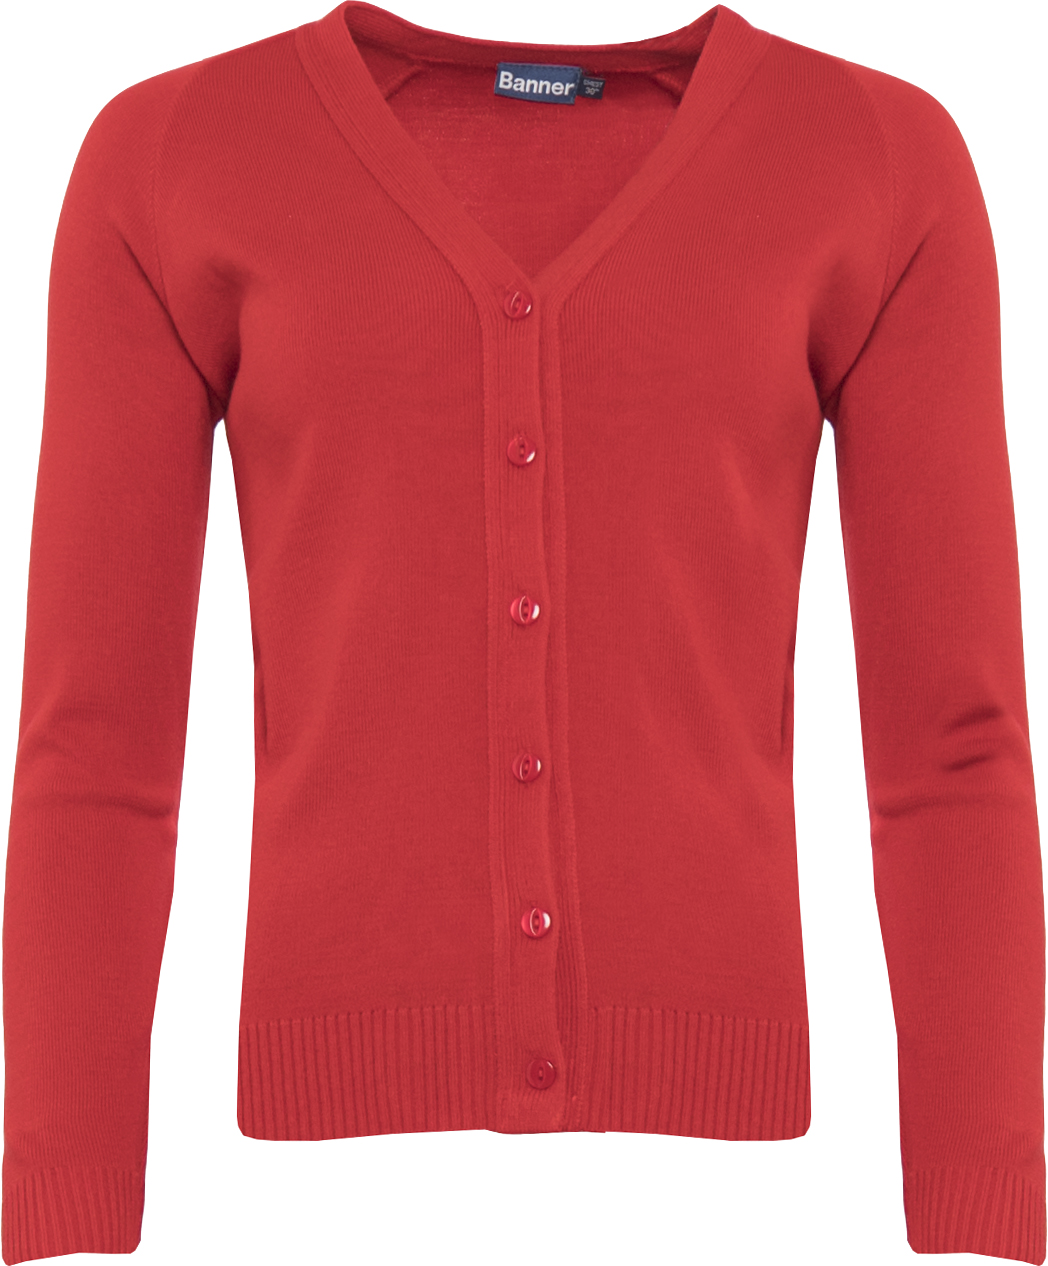 Craigton Primary Knitted Cardigan